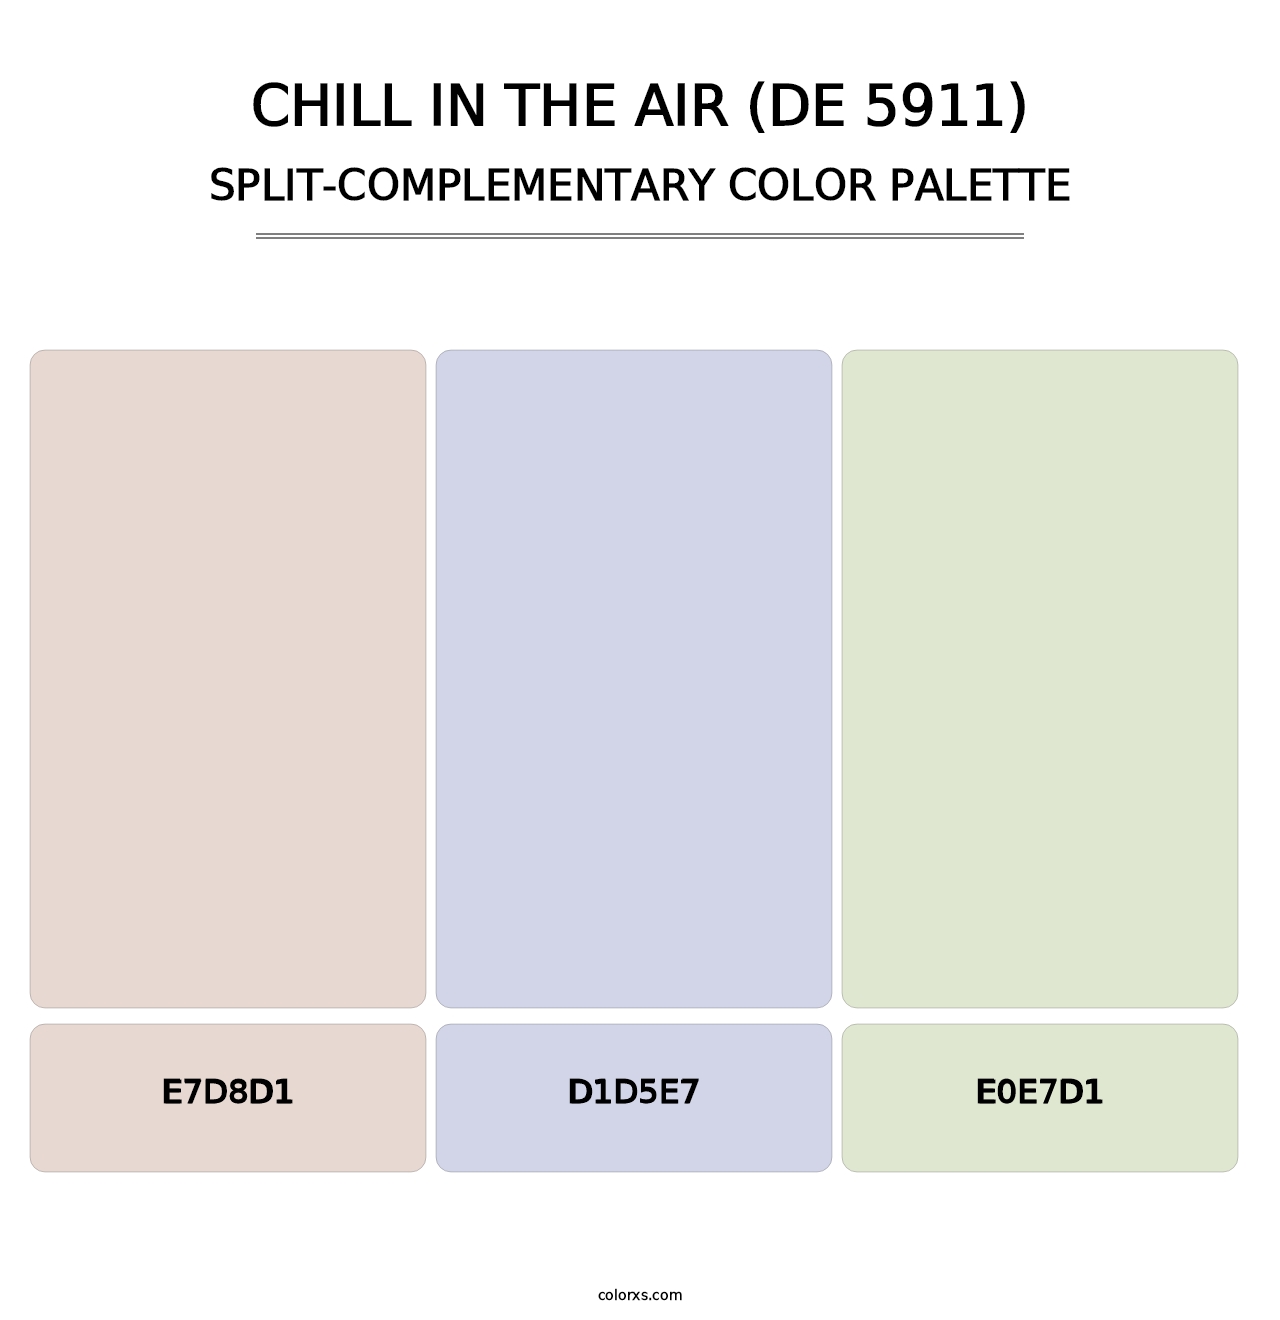 Chill in the Air (DE 5911) - Split-Complementary Color Palette